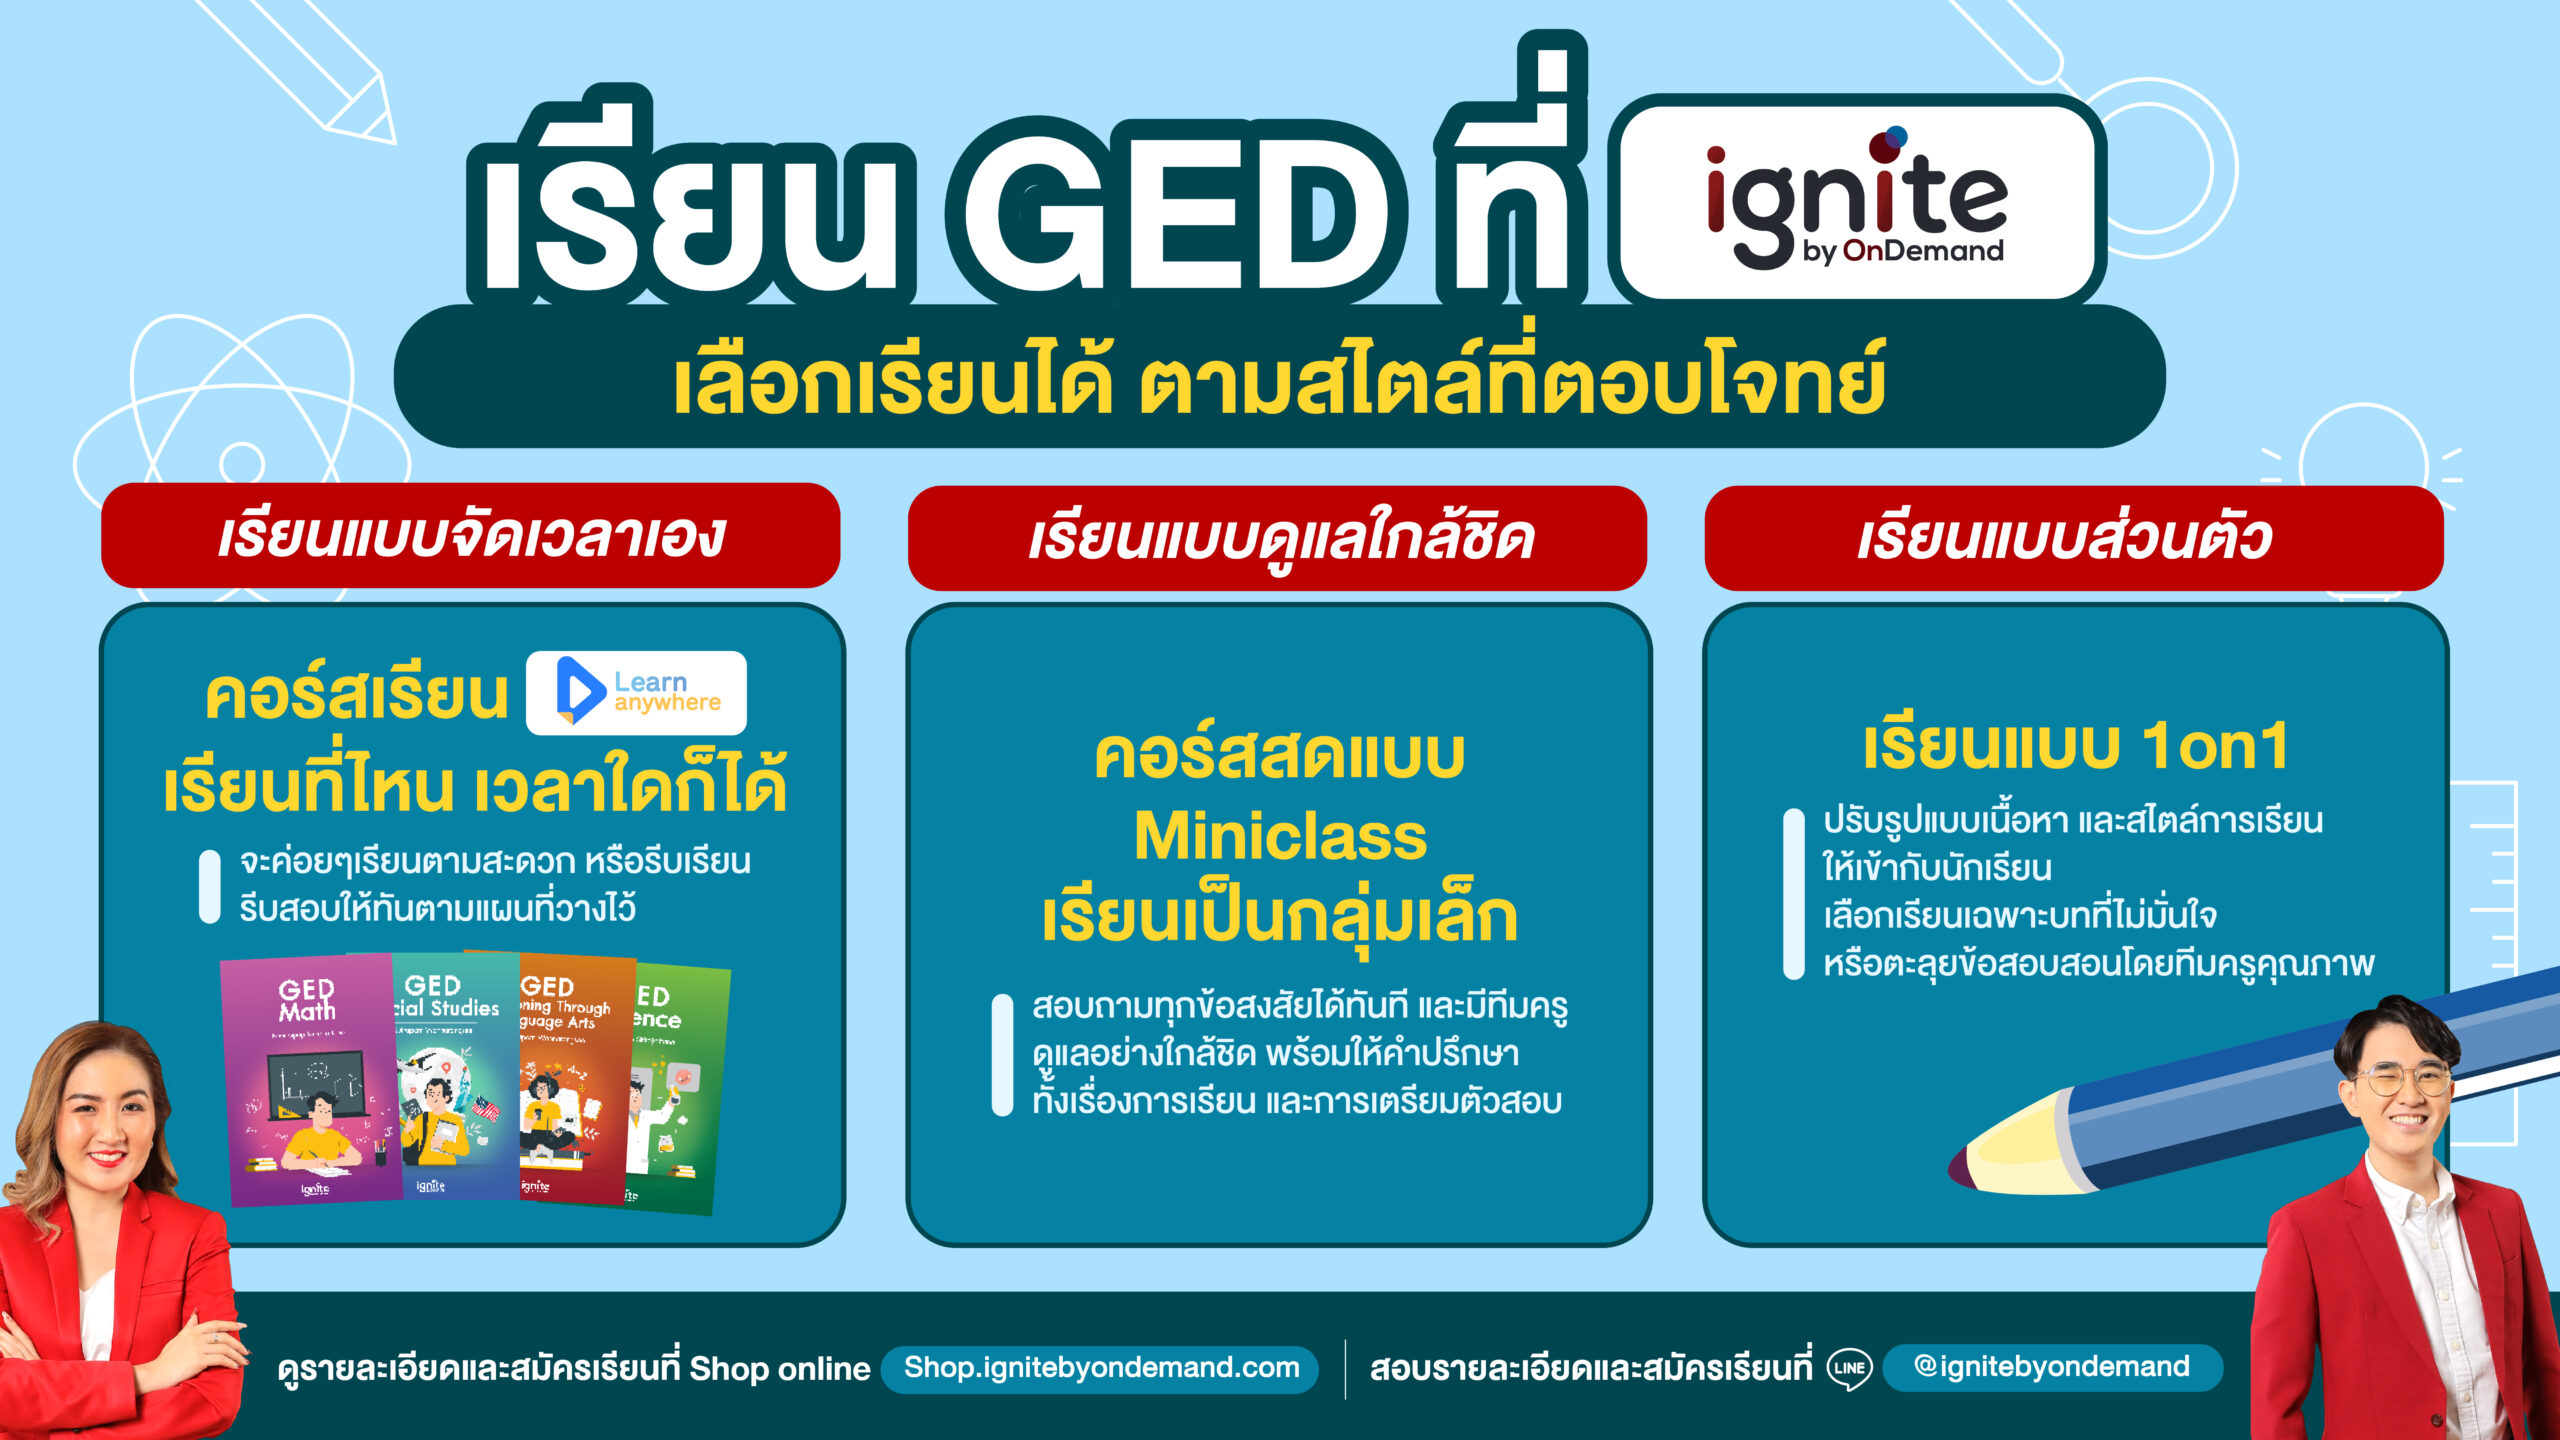 GED Banner - ignite by ondemand